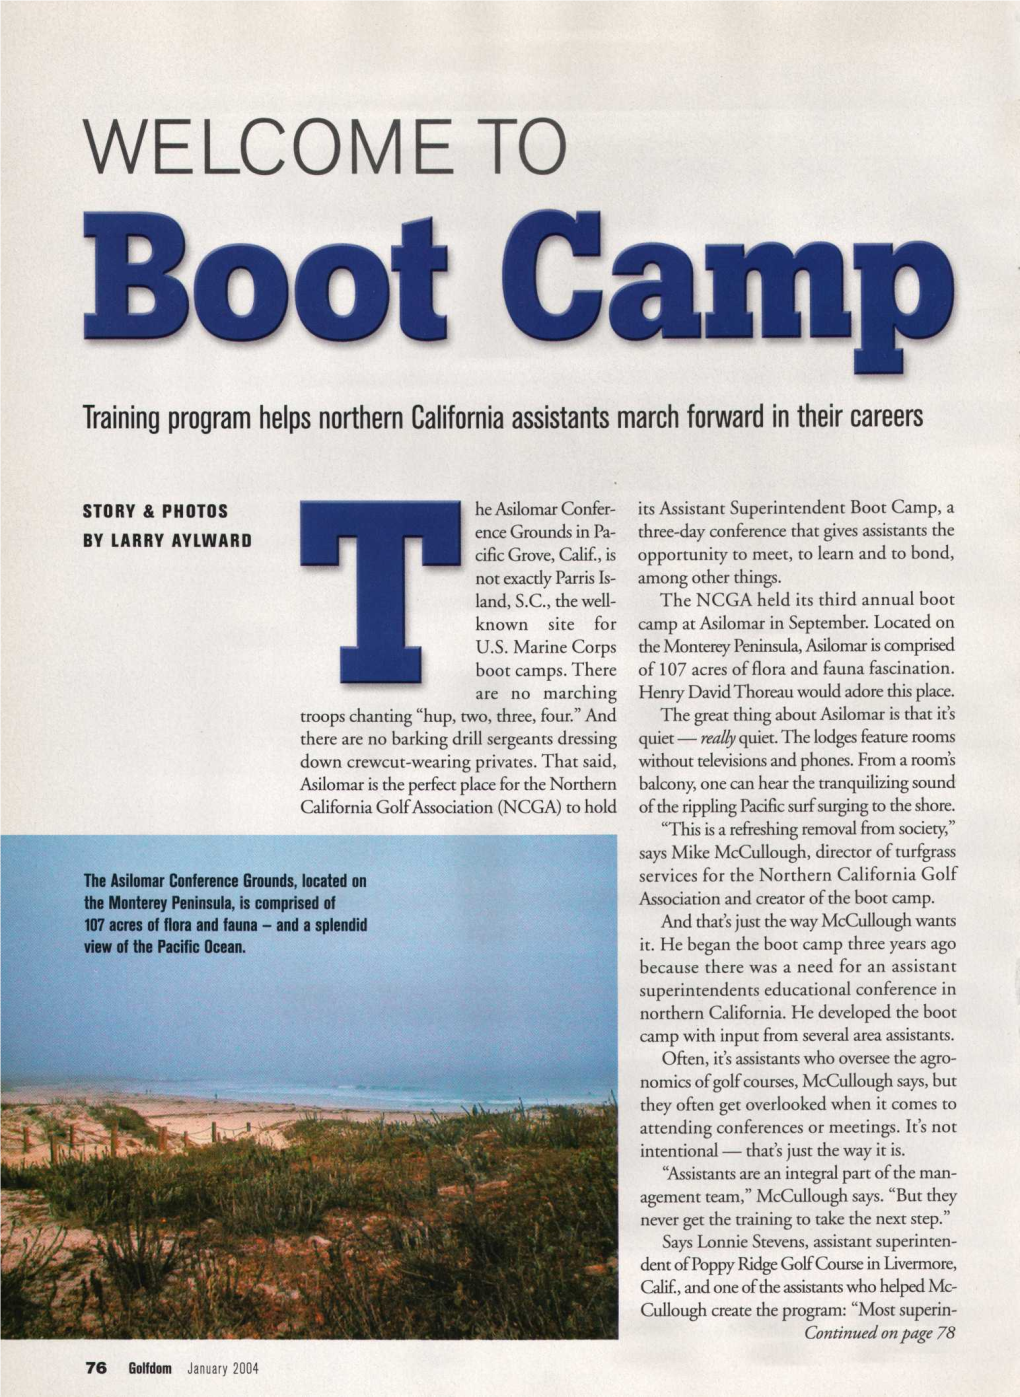 WELCOME to Boot Camp Training Program Helps Northern California Assistants March Forward in Their Careers